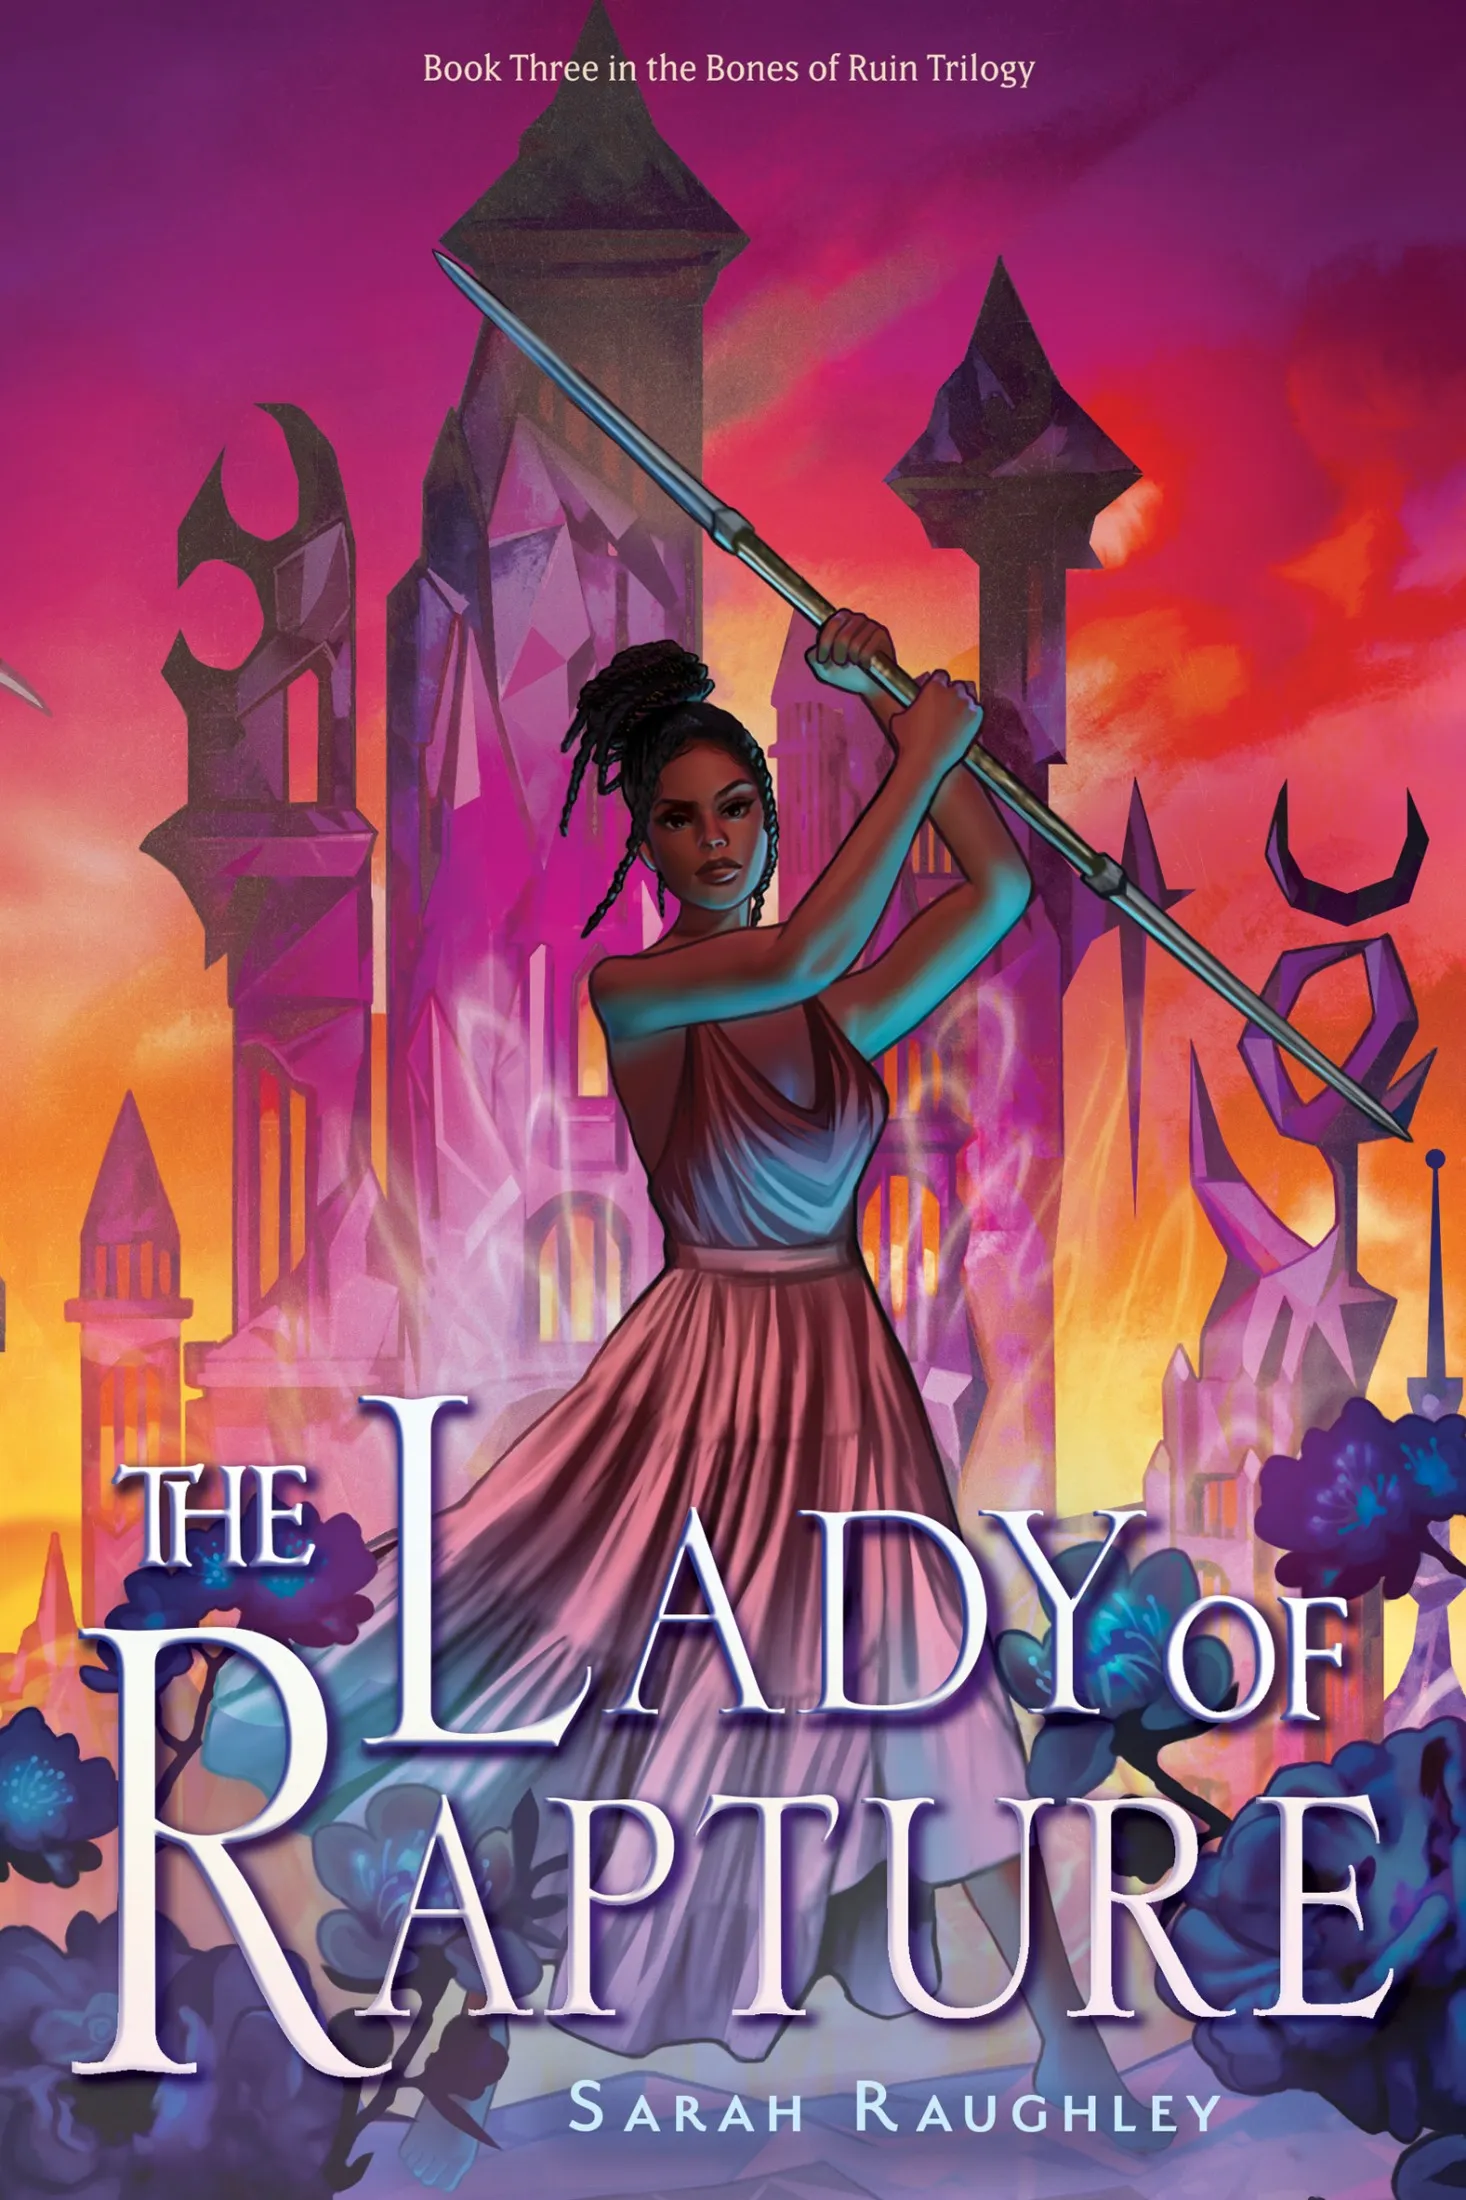 The Lady of Rapture (Bones of Ruin Trilogy #3)